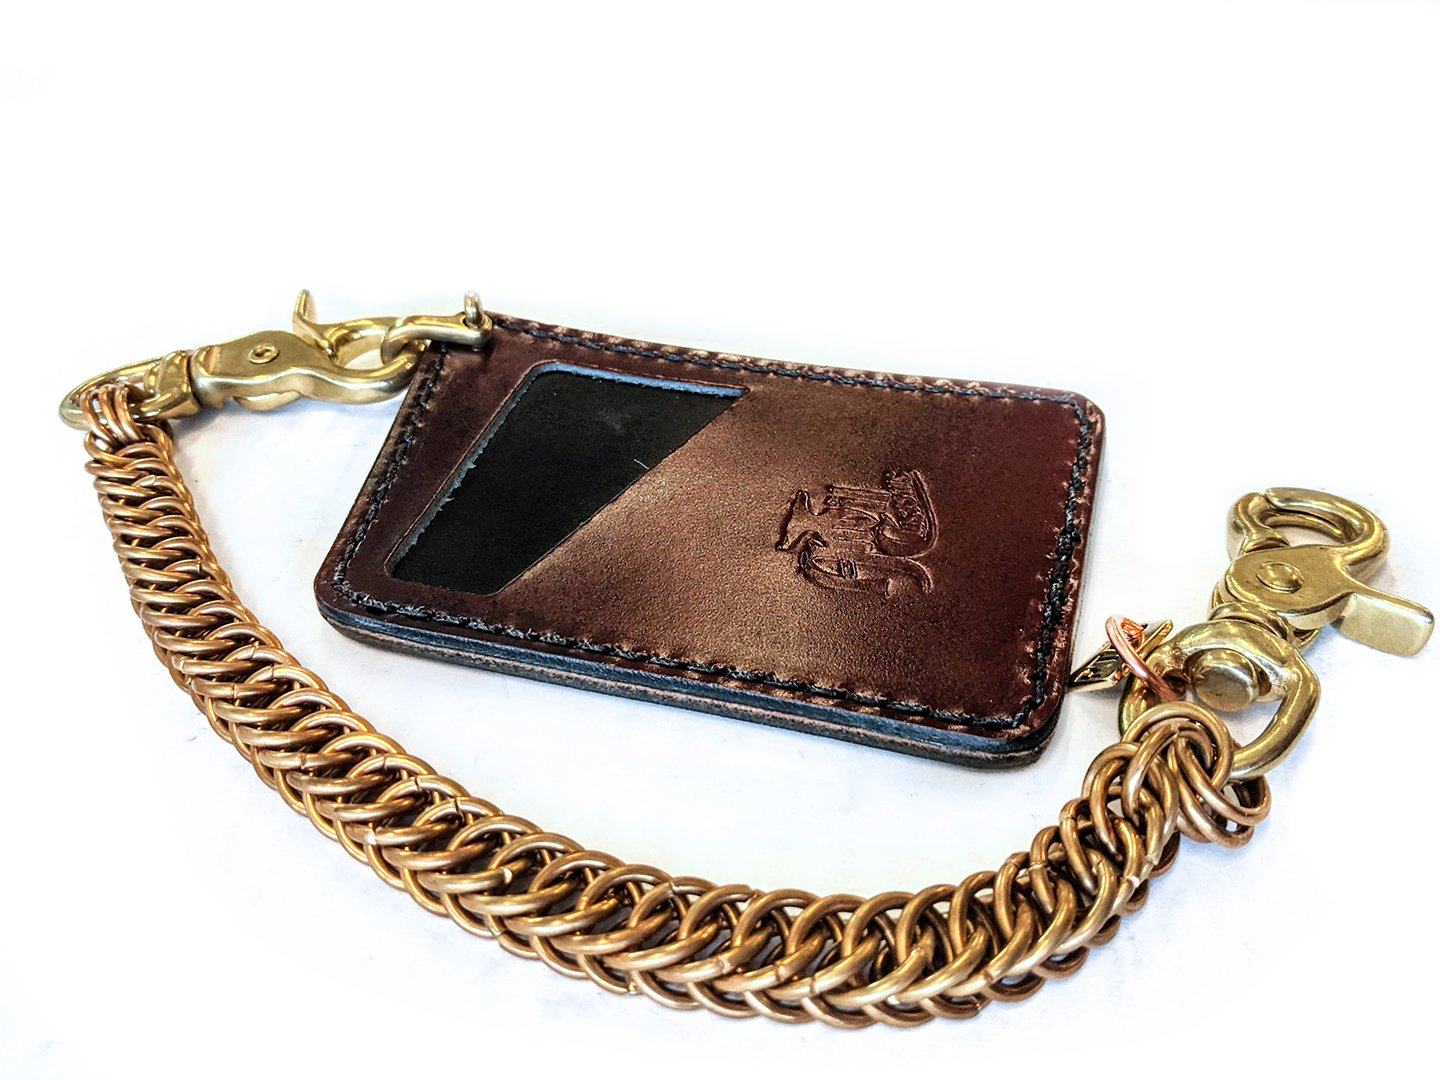 English Tan Leather Money Clip Wallet